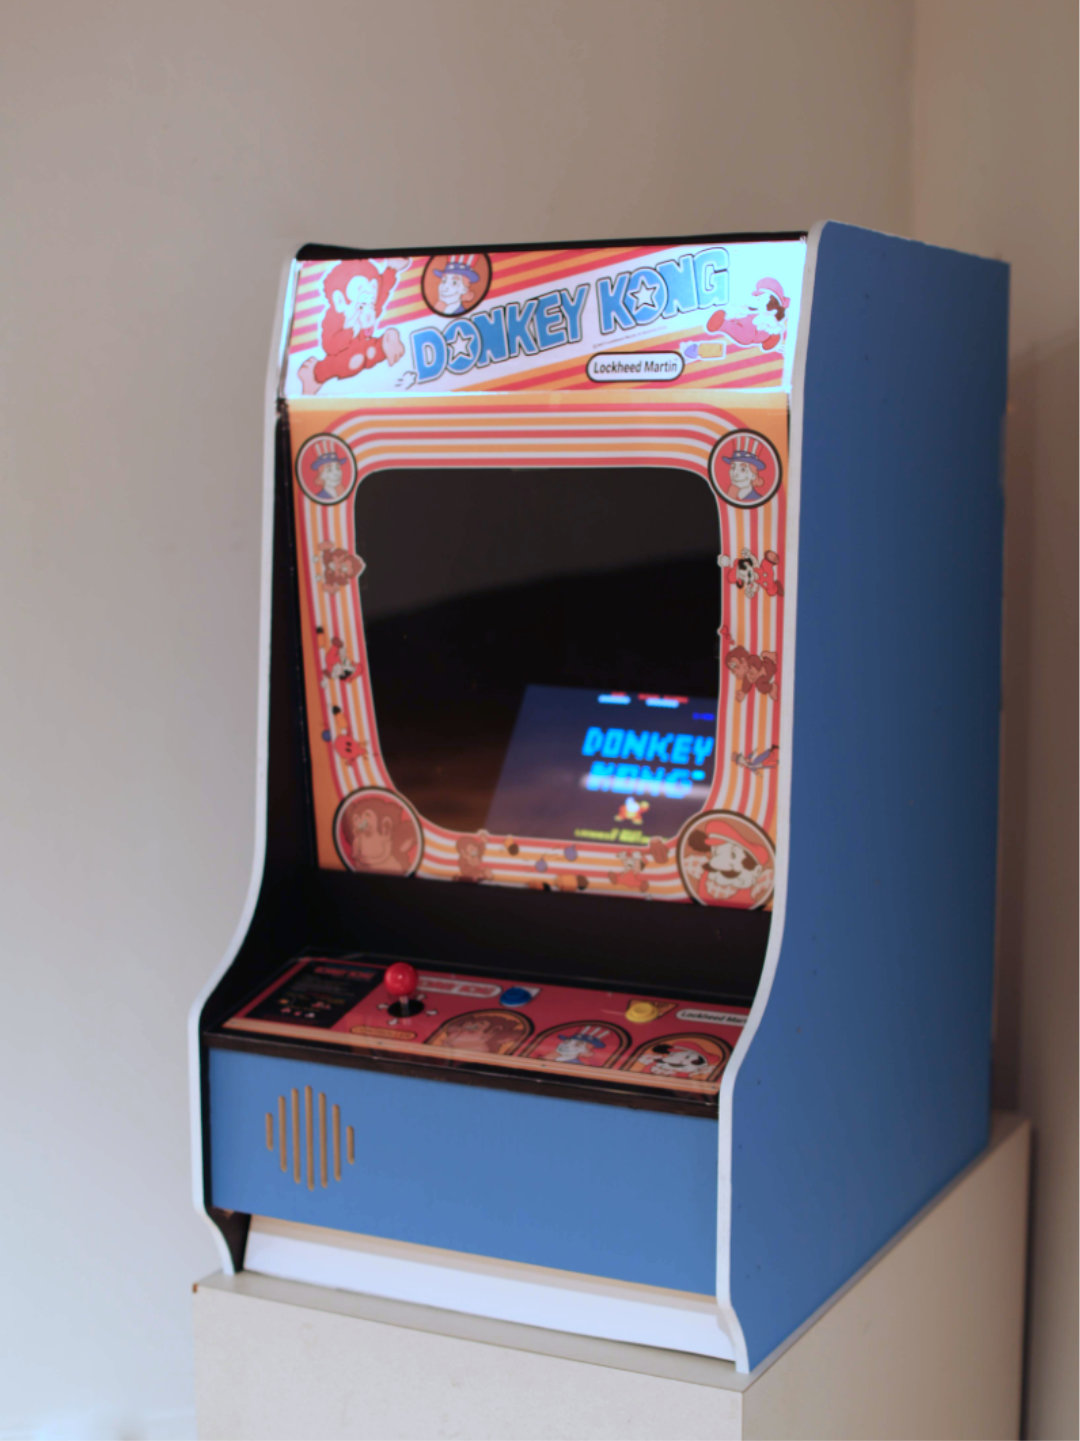 The 2017 Donkey Kong Arms Deal arcade machine.